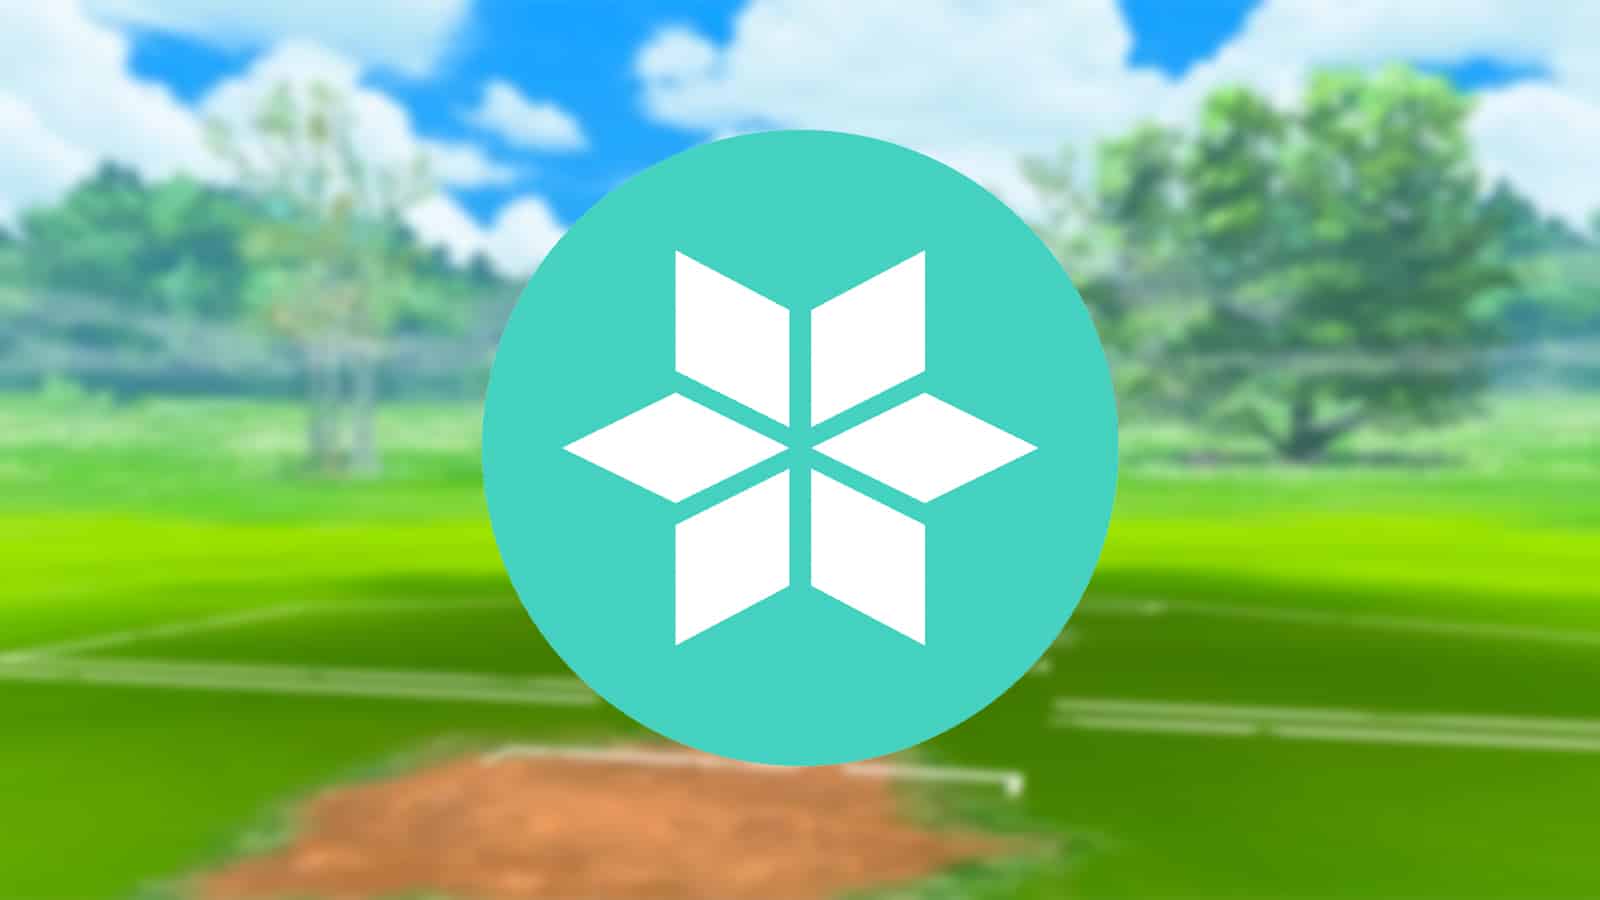 The symbol for Icicle Spear in Pokemon Go